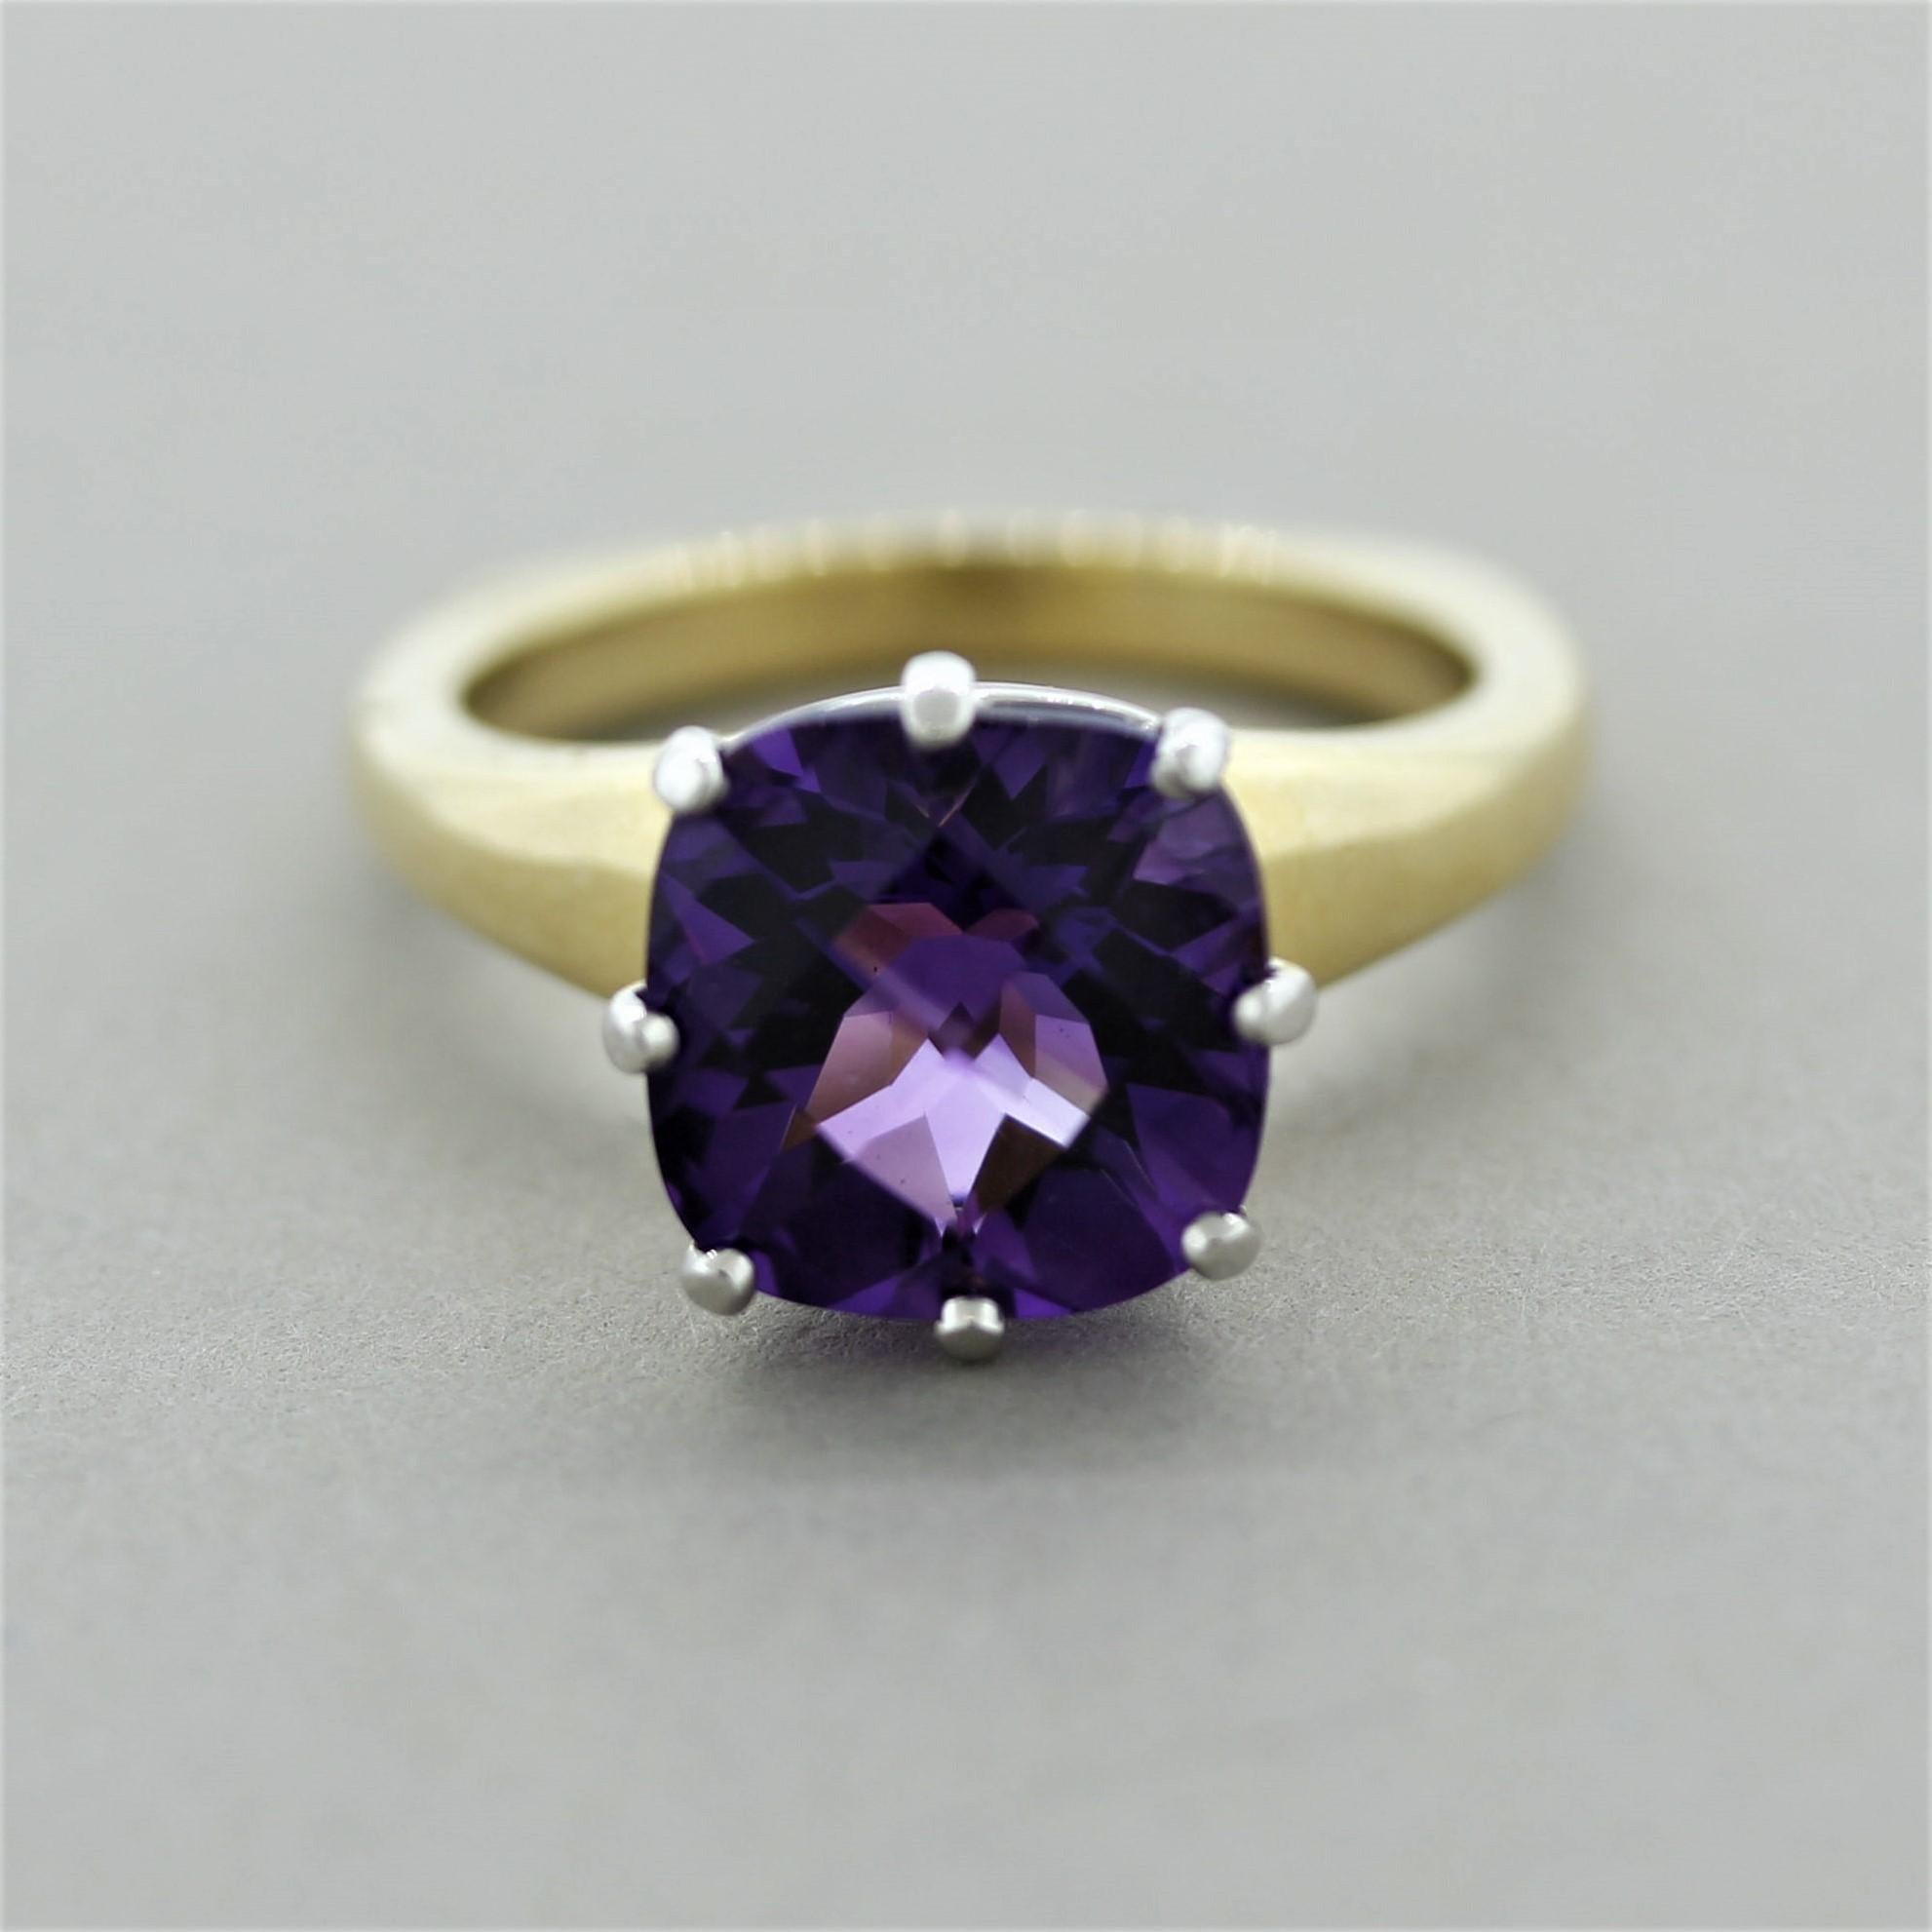 A royal stylish ring featuring a 4.00 carat amethyst with a vivid purple color. The fine gem is cushion shaped with a rose-cut finish and is accented by 0.42 carats of round brilliant-cut diamonds set below it. The amethyst and diamonds are set in